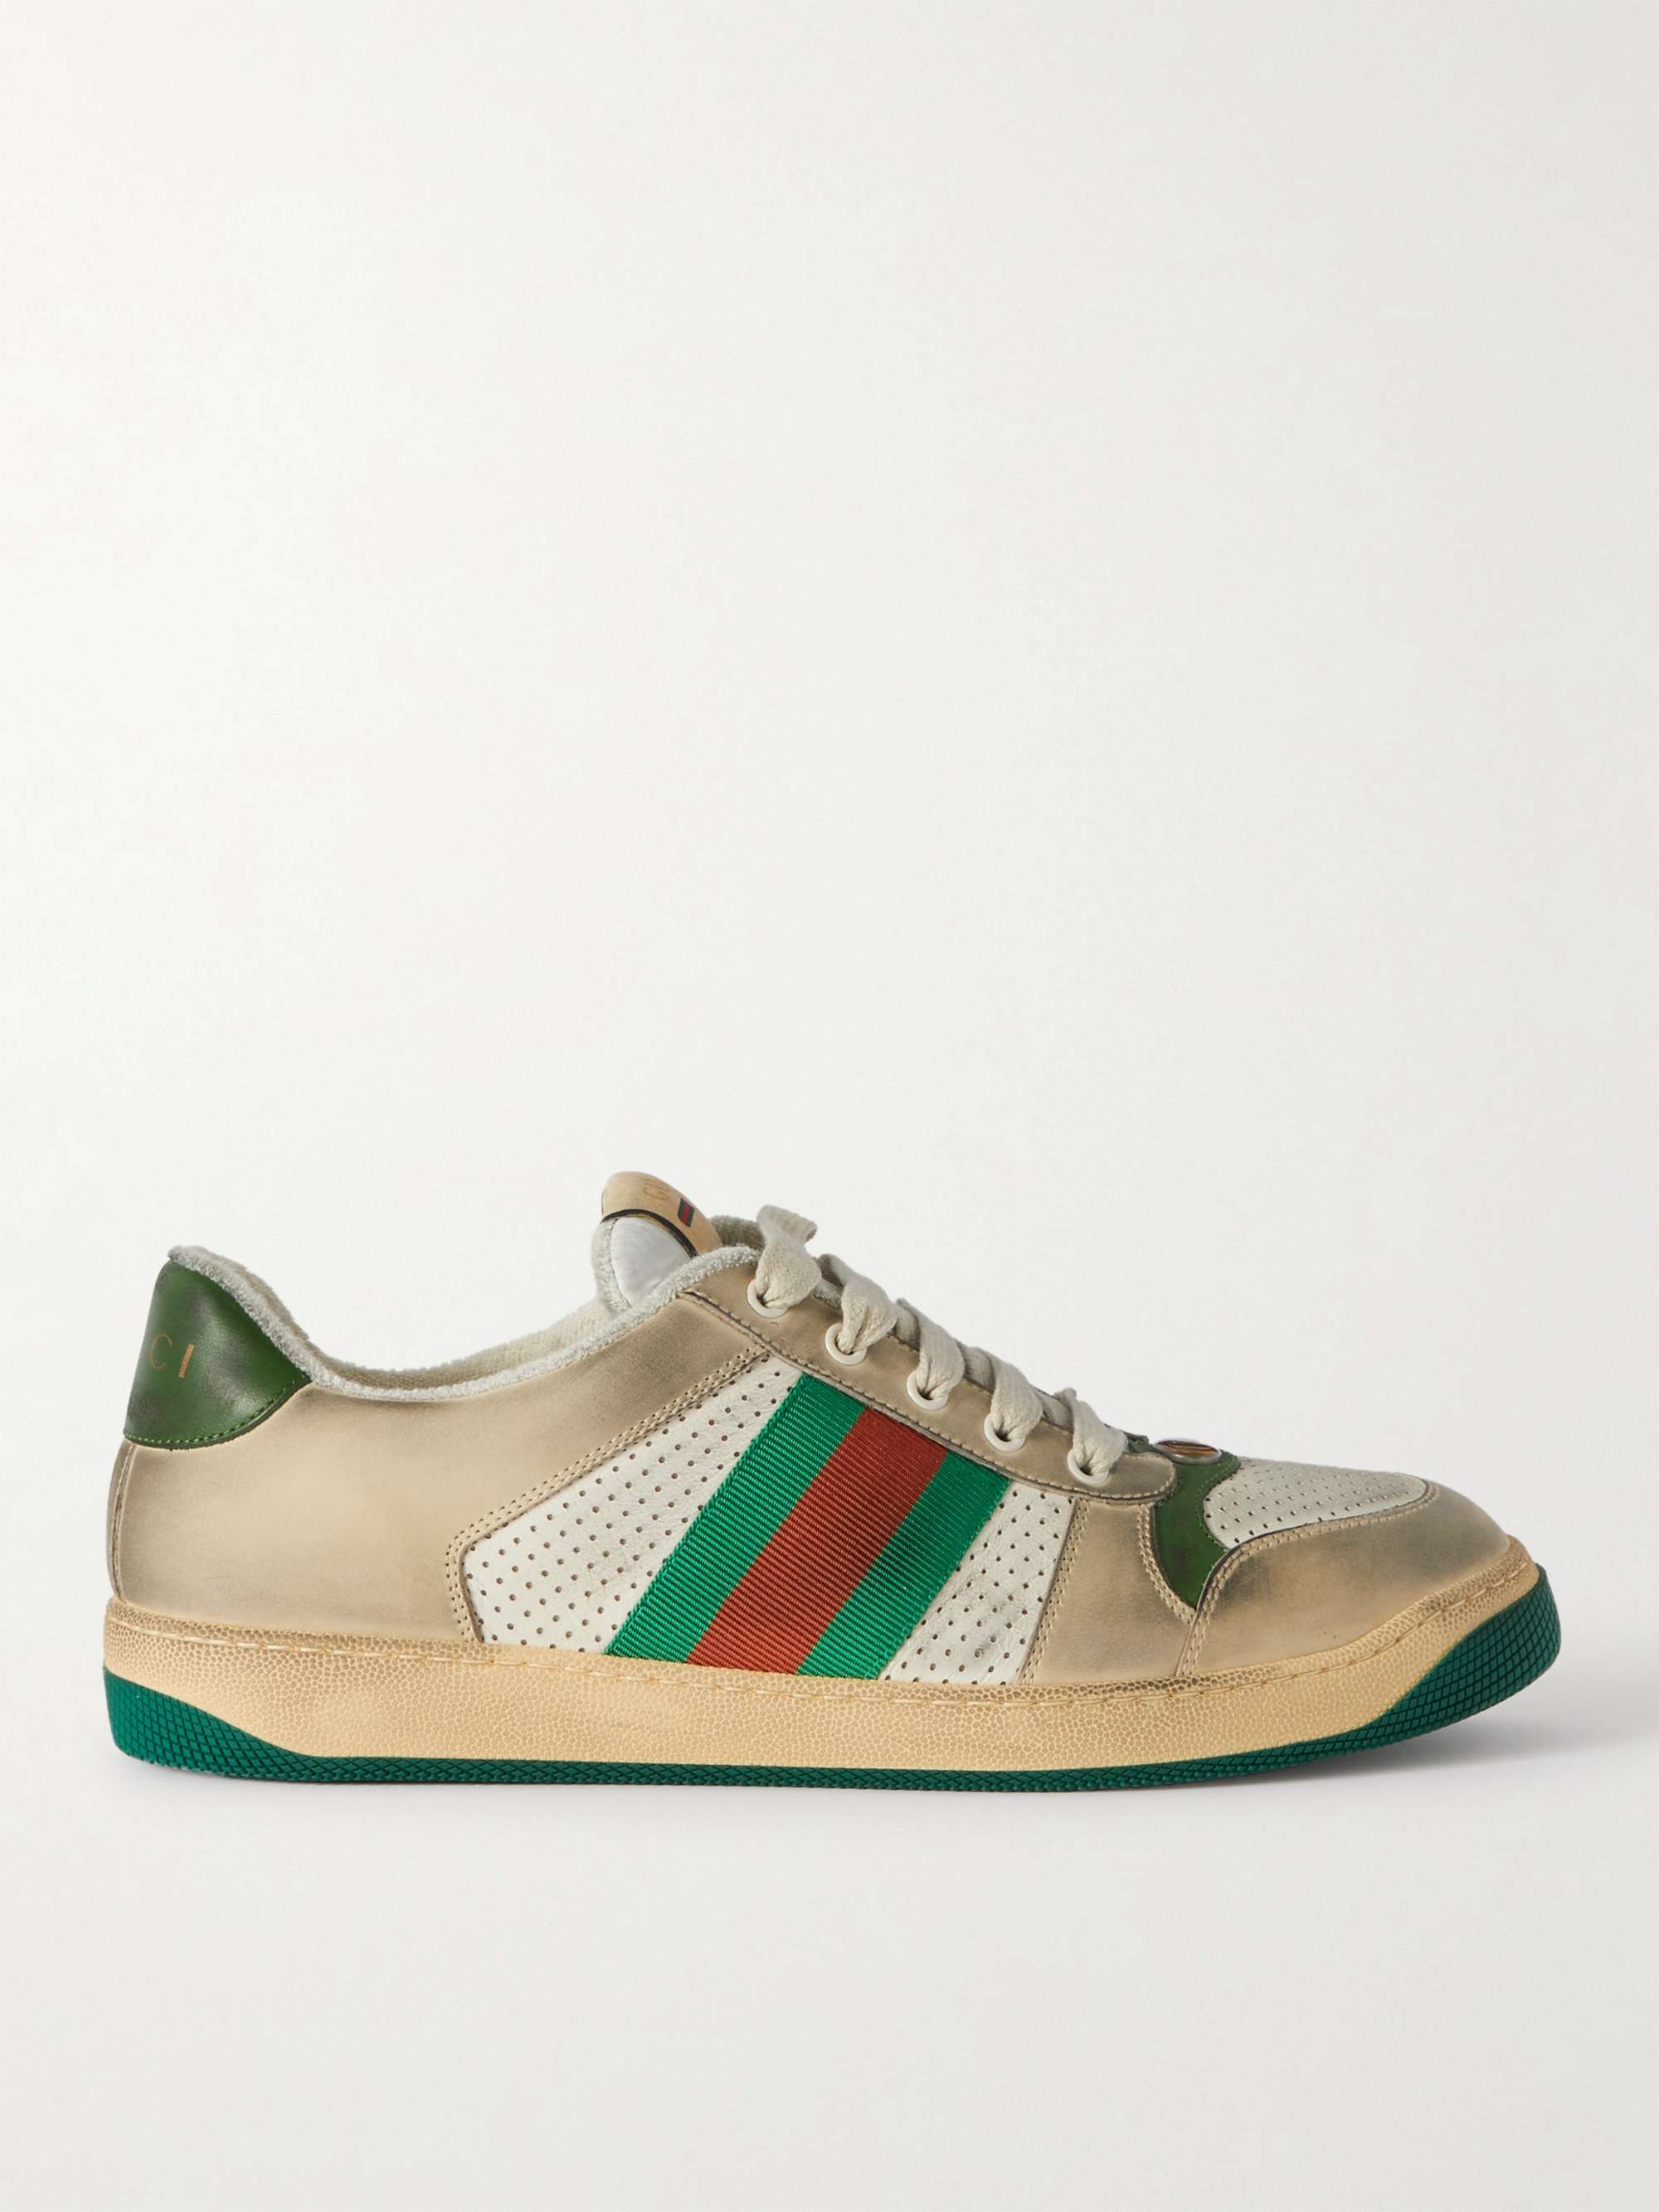 GUCCI Virtus Distressed Leather and Webbing Sneakers | MR PORTER